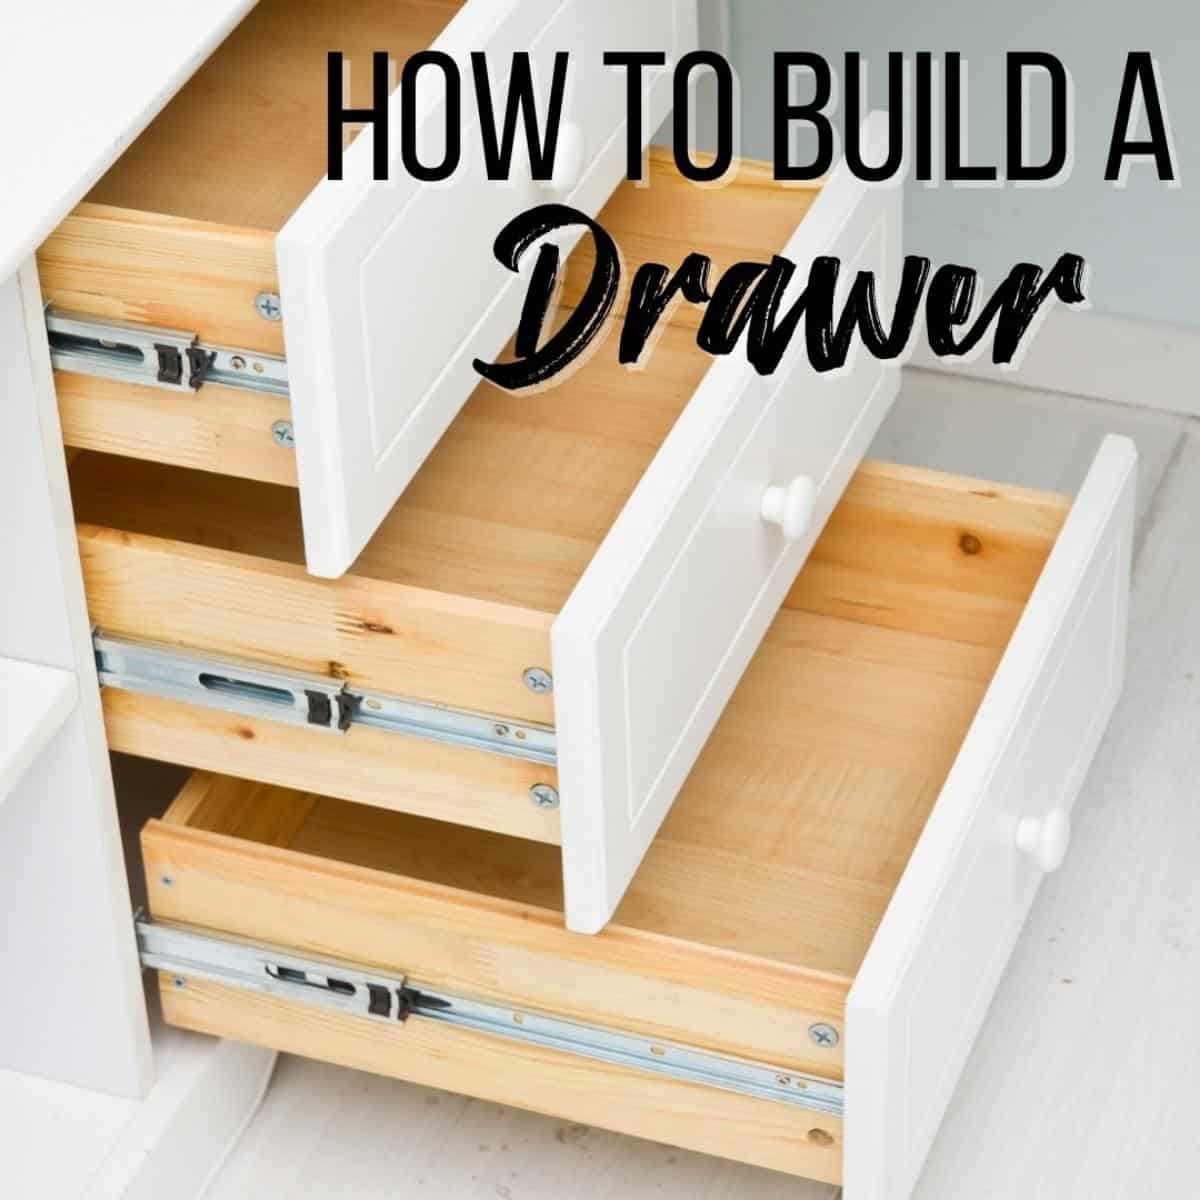 DIY Wood Pull Out Tray Drawer Box Kitchen Cabinet Organizer